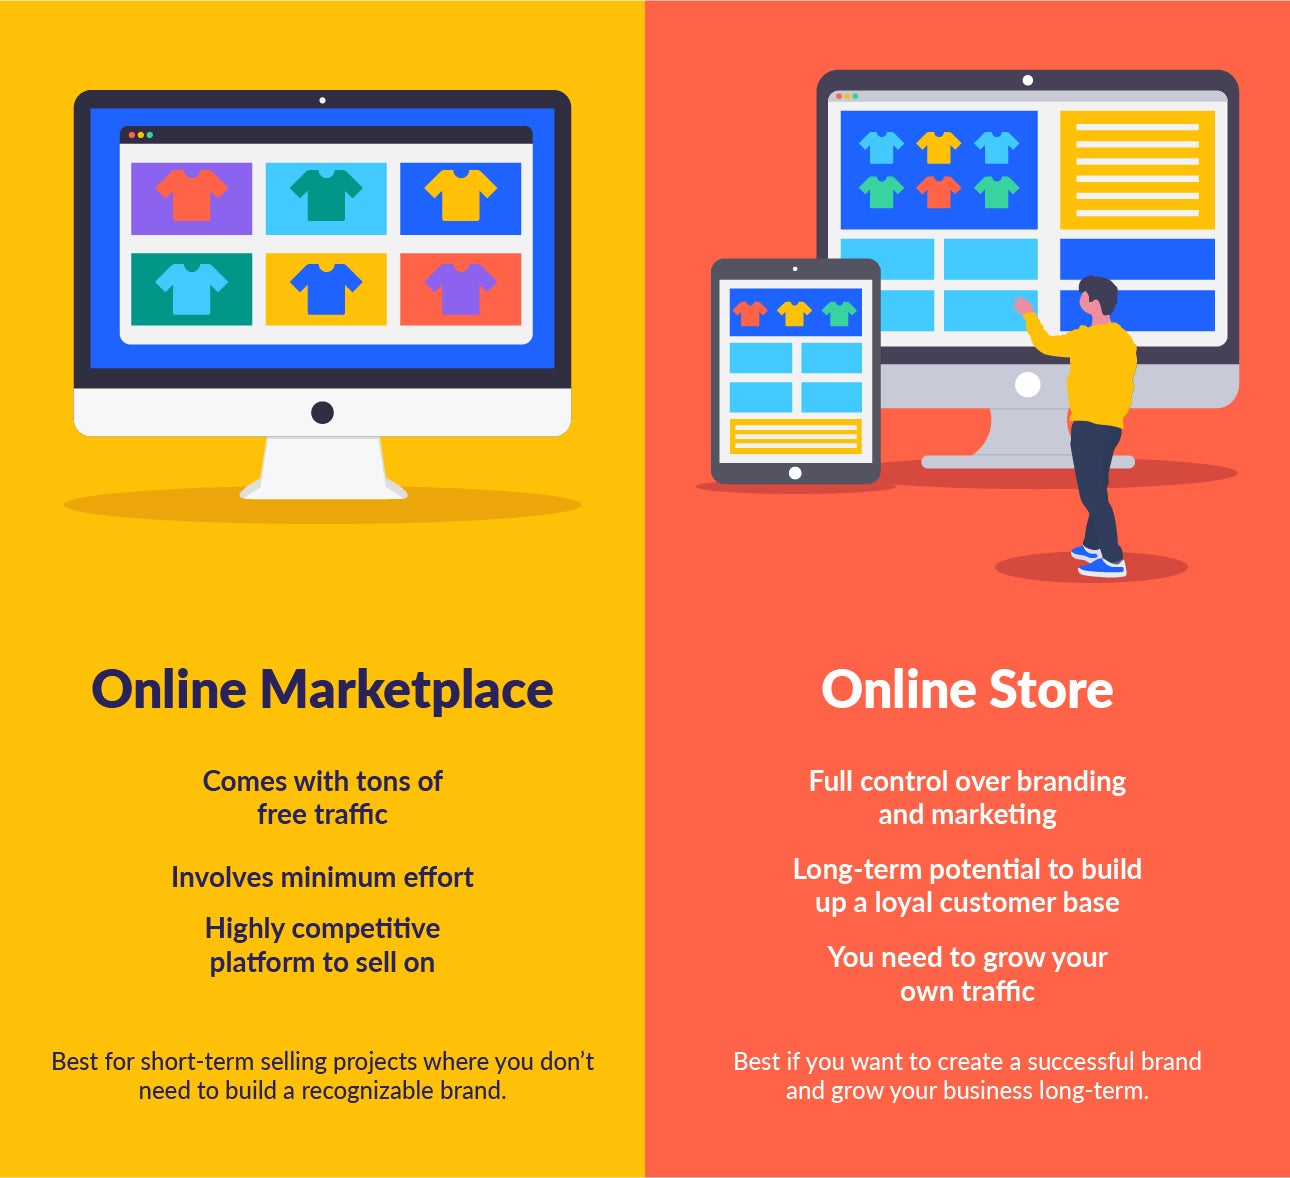 Graphic split in two to highlight the differences between dropshipping using an online store vs online marketplace